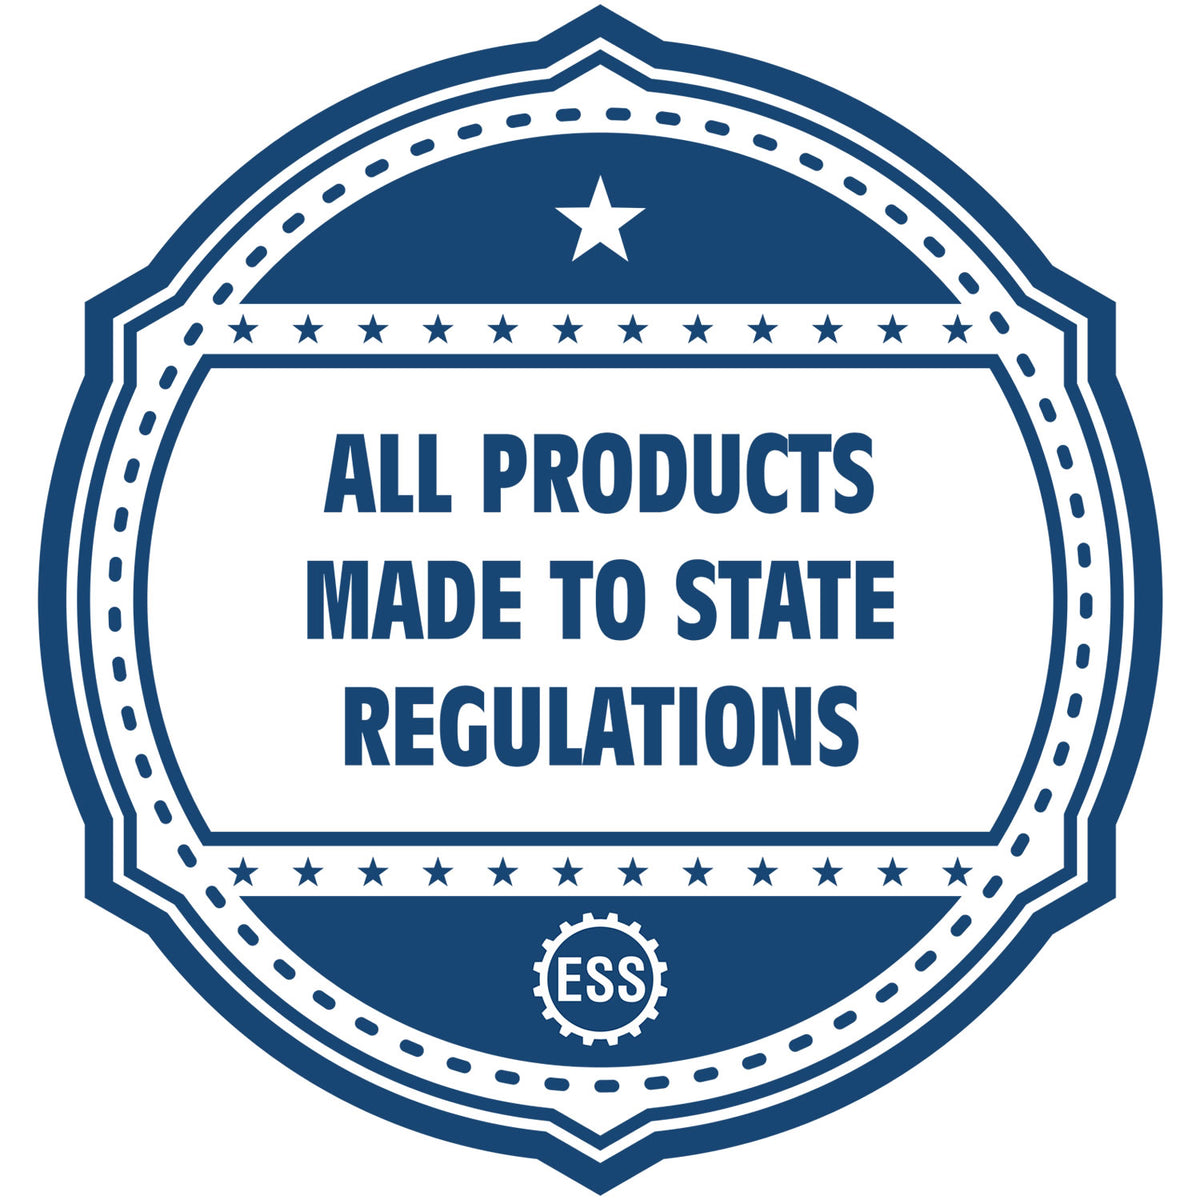 An icon or badge element for the PSI Kansas Notary Stamp showing that this product is made in compliance with state regulations.